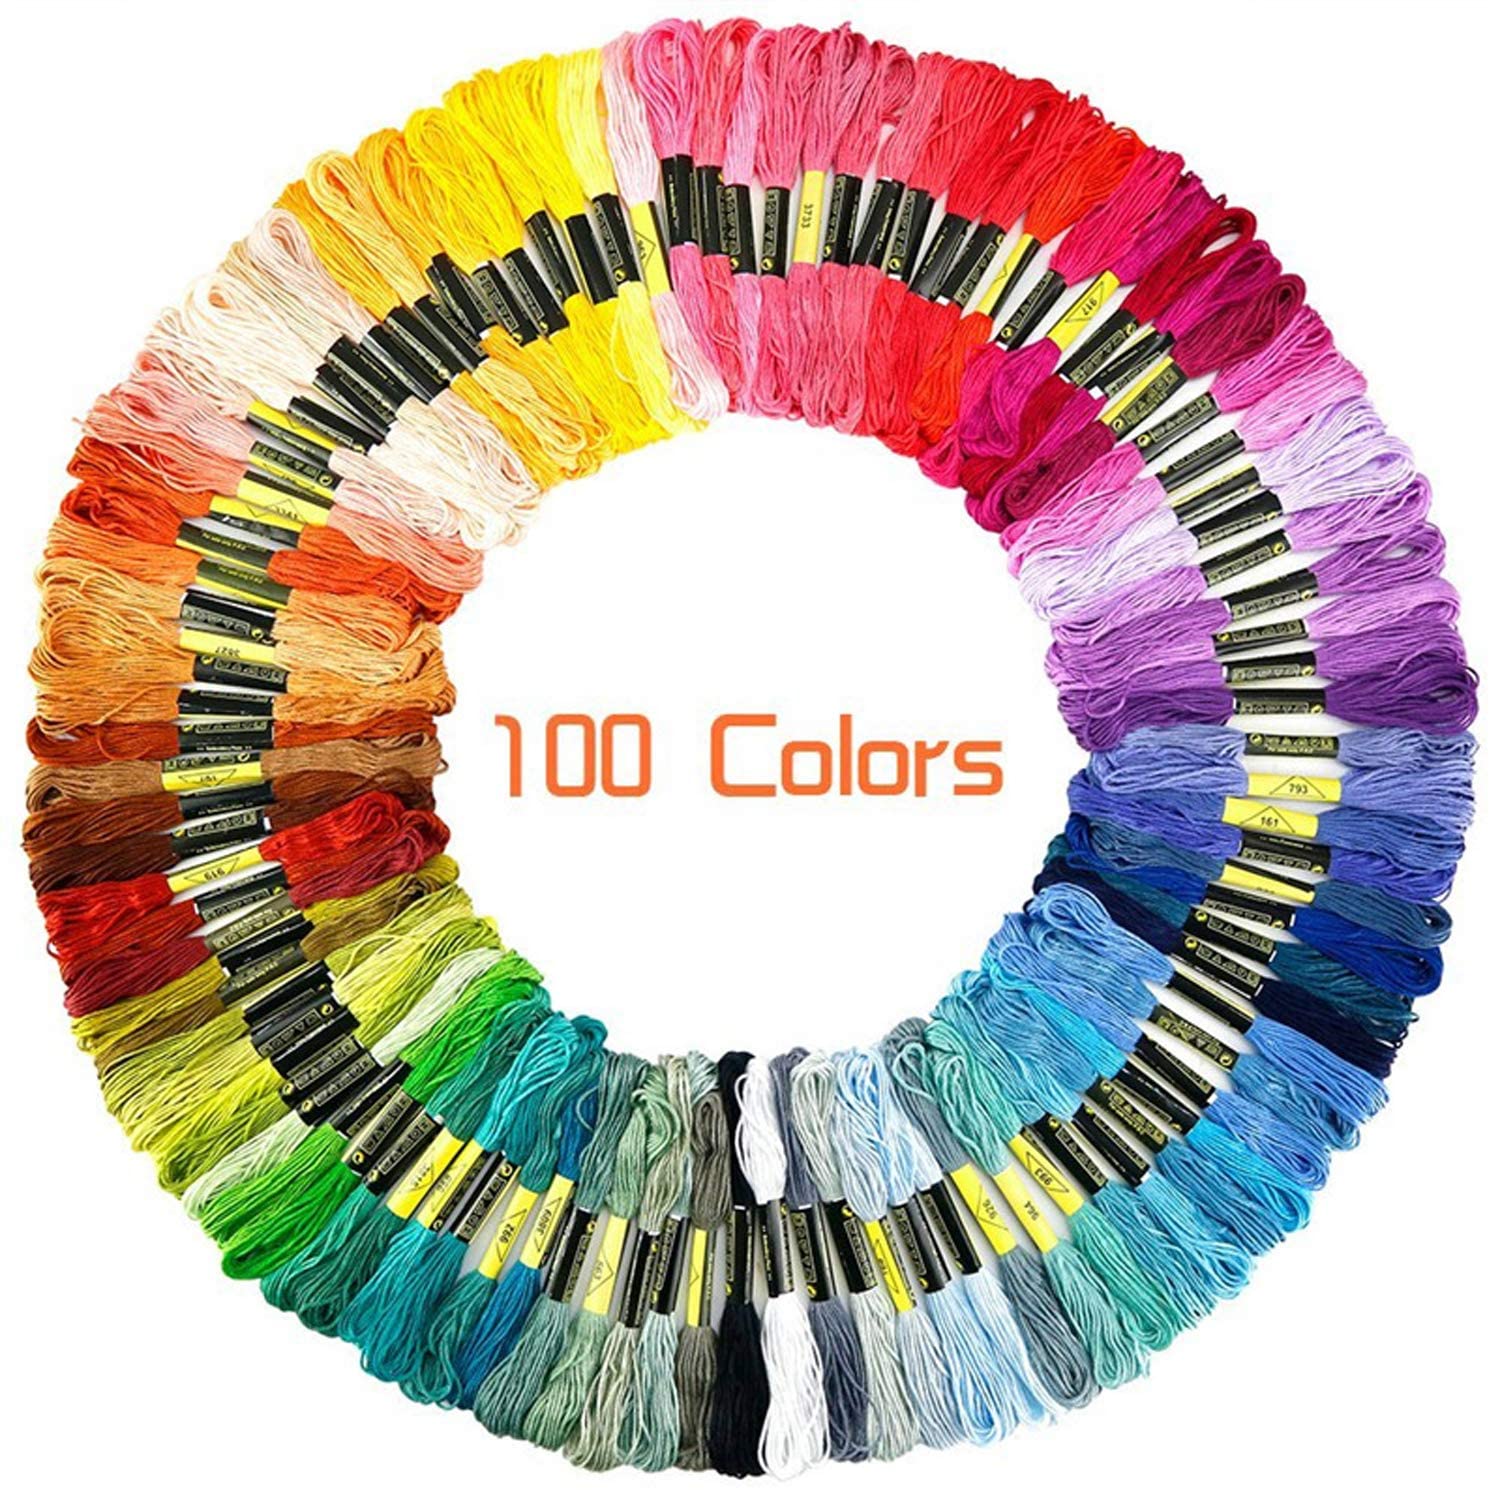 Embroidery Kit Cross Stitch Tool 100 Colors ,Embroidery Needles Threads,Embroidery Starter kit for Beginners, DIY Friendship Bracelets String Art Crafts - image 2 of 8